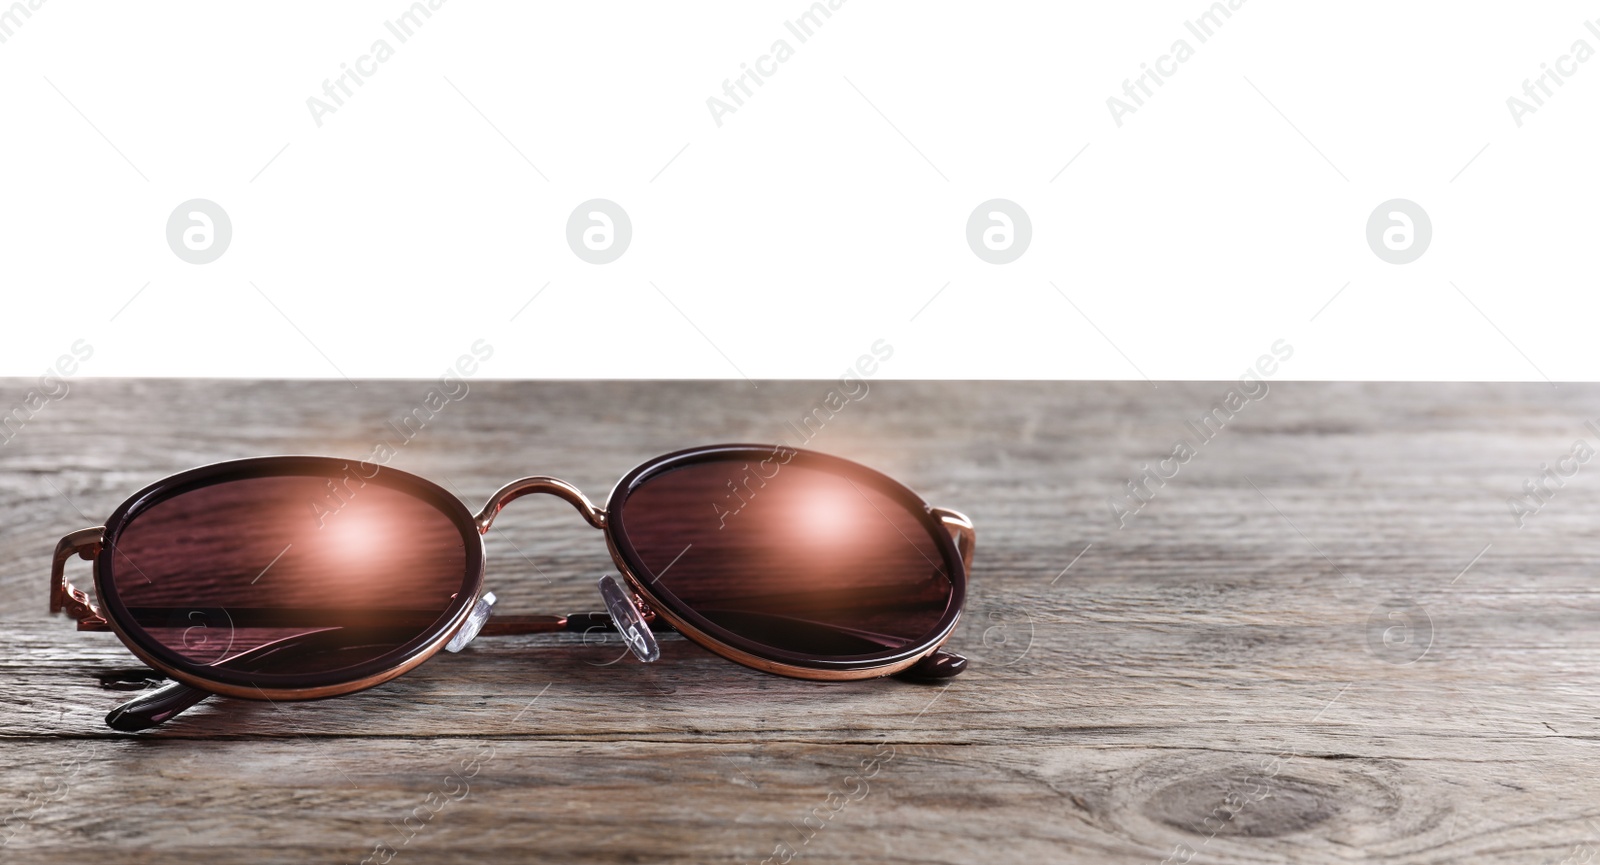 Photo of Stylish sunglasses on wooden table against white background. Space for text